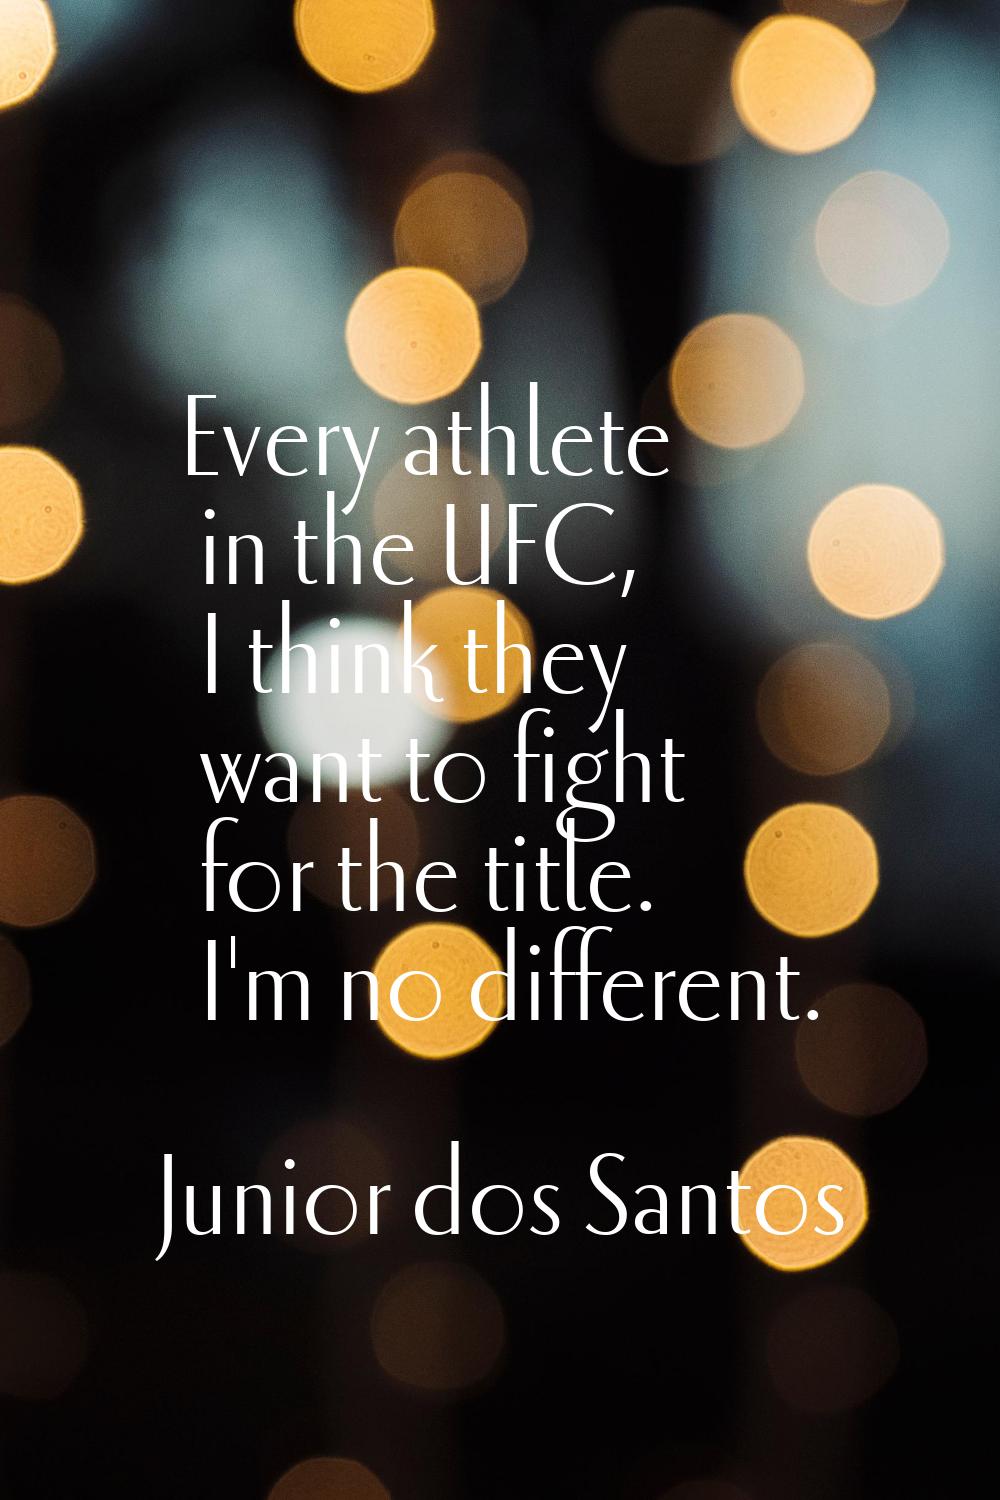 Every athlete in the UFC, I think they want to fight for the title. I'm no different.